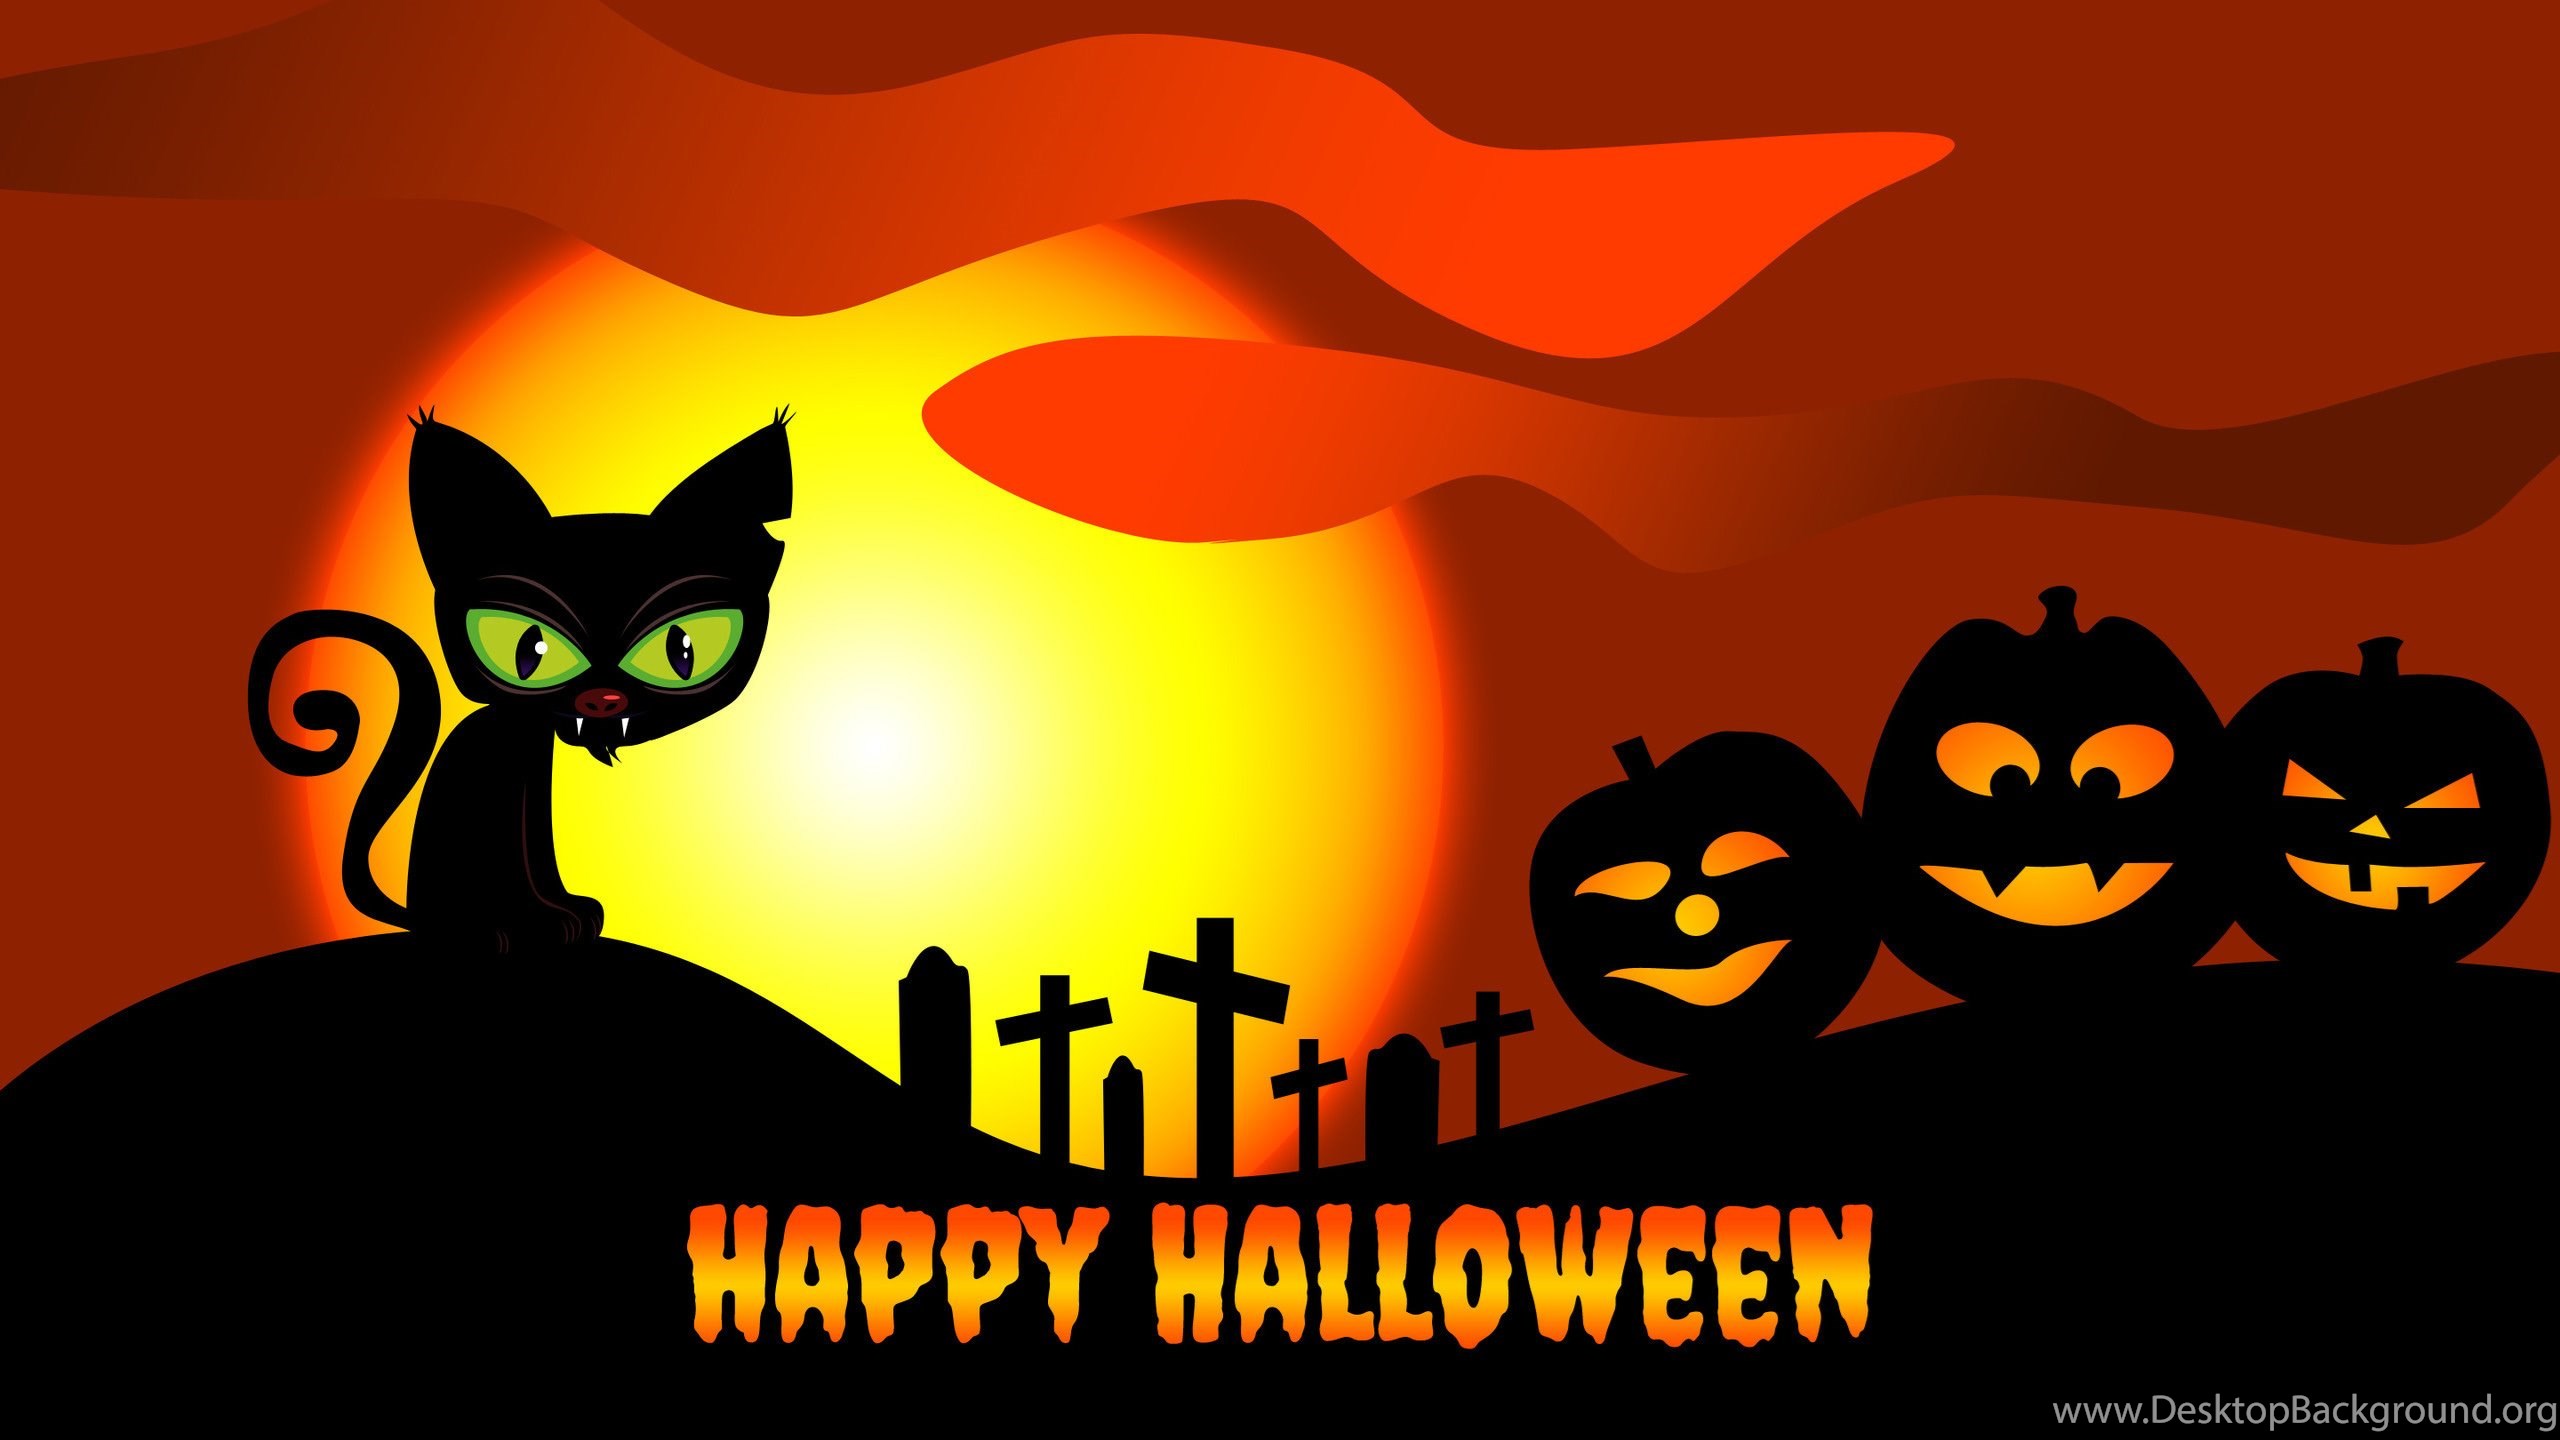 Happy Halloween Wallpaper Clip Art With Silhouette Of Cat And. Desktop Background